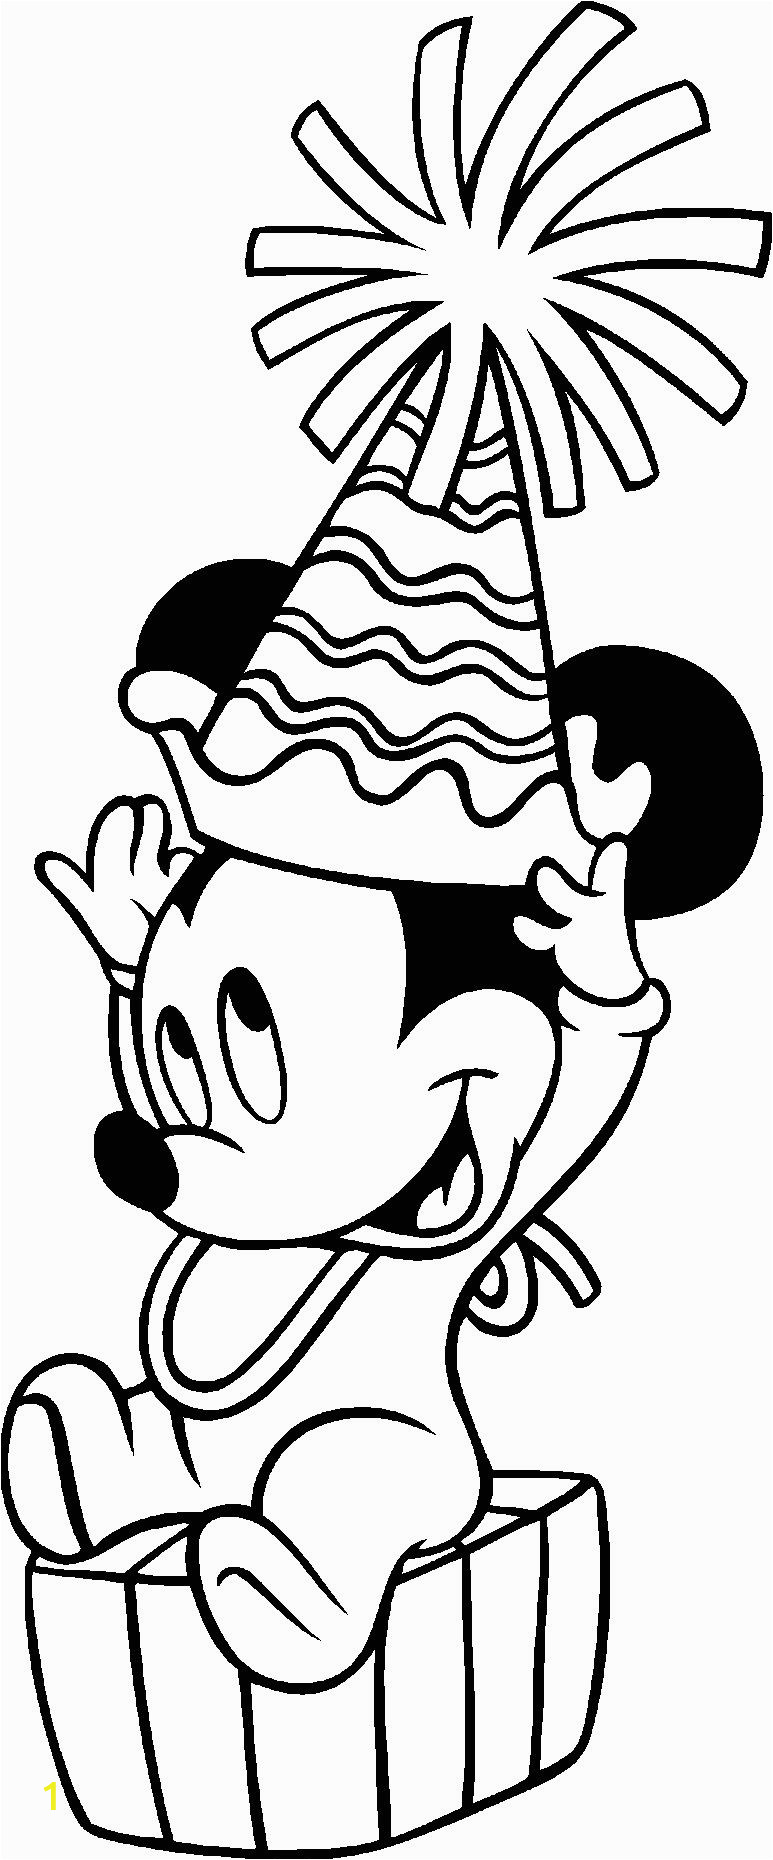 Free Printable Minnie Mouse Coloring Pages Free Printable Mickey Mouse Coloring Pages for Kids